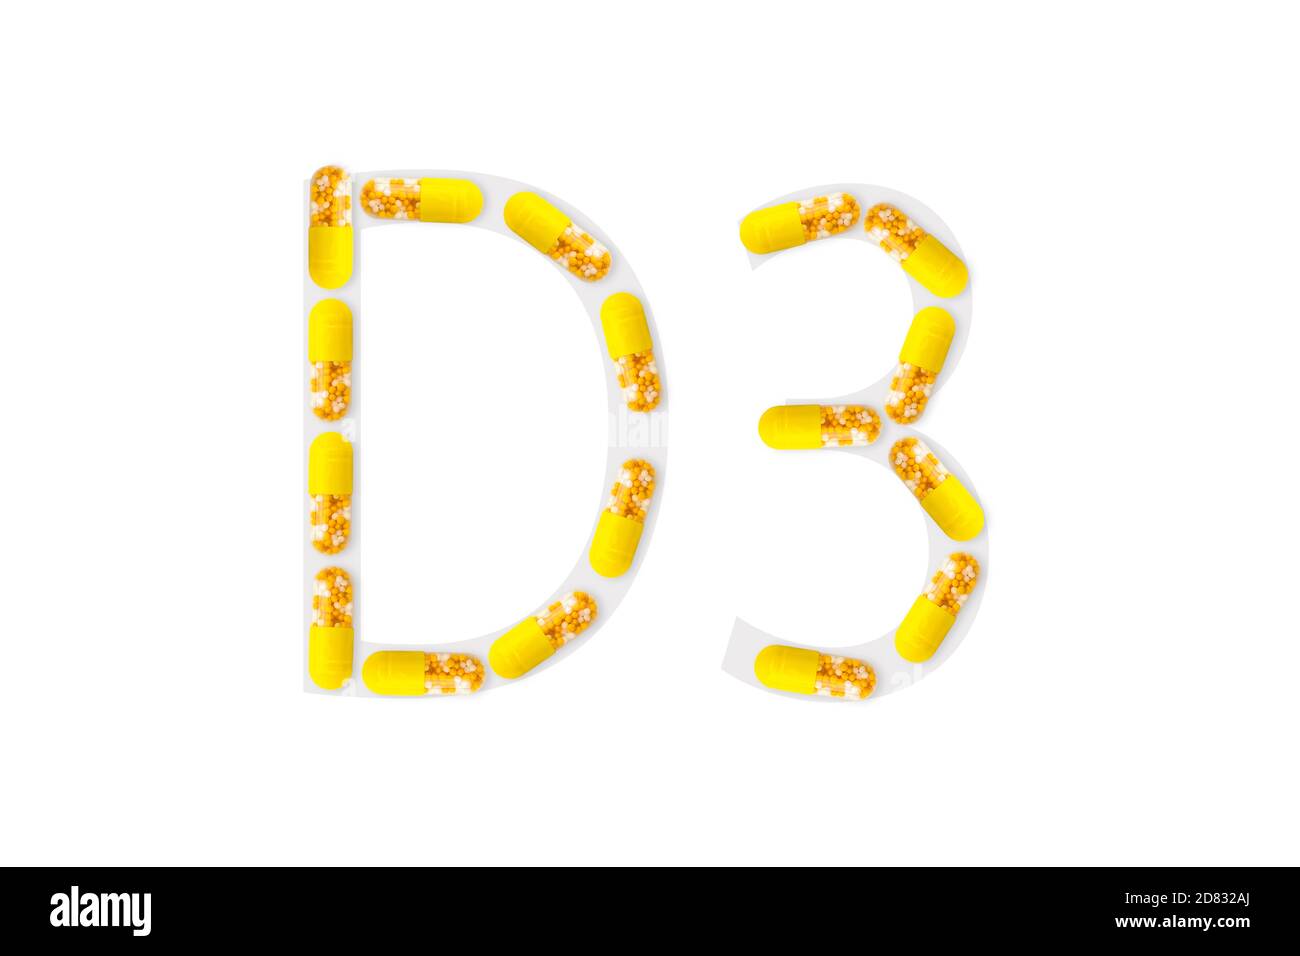 Bright yellow capsules forming shape D3 on white background, Vitamin D3 dietary supplement Stock Photo